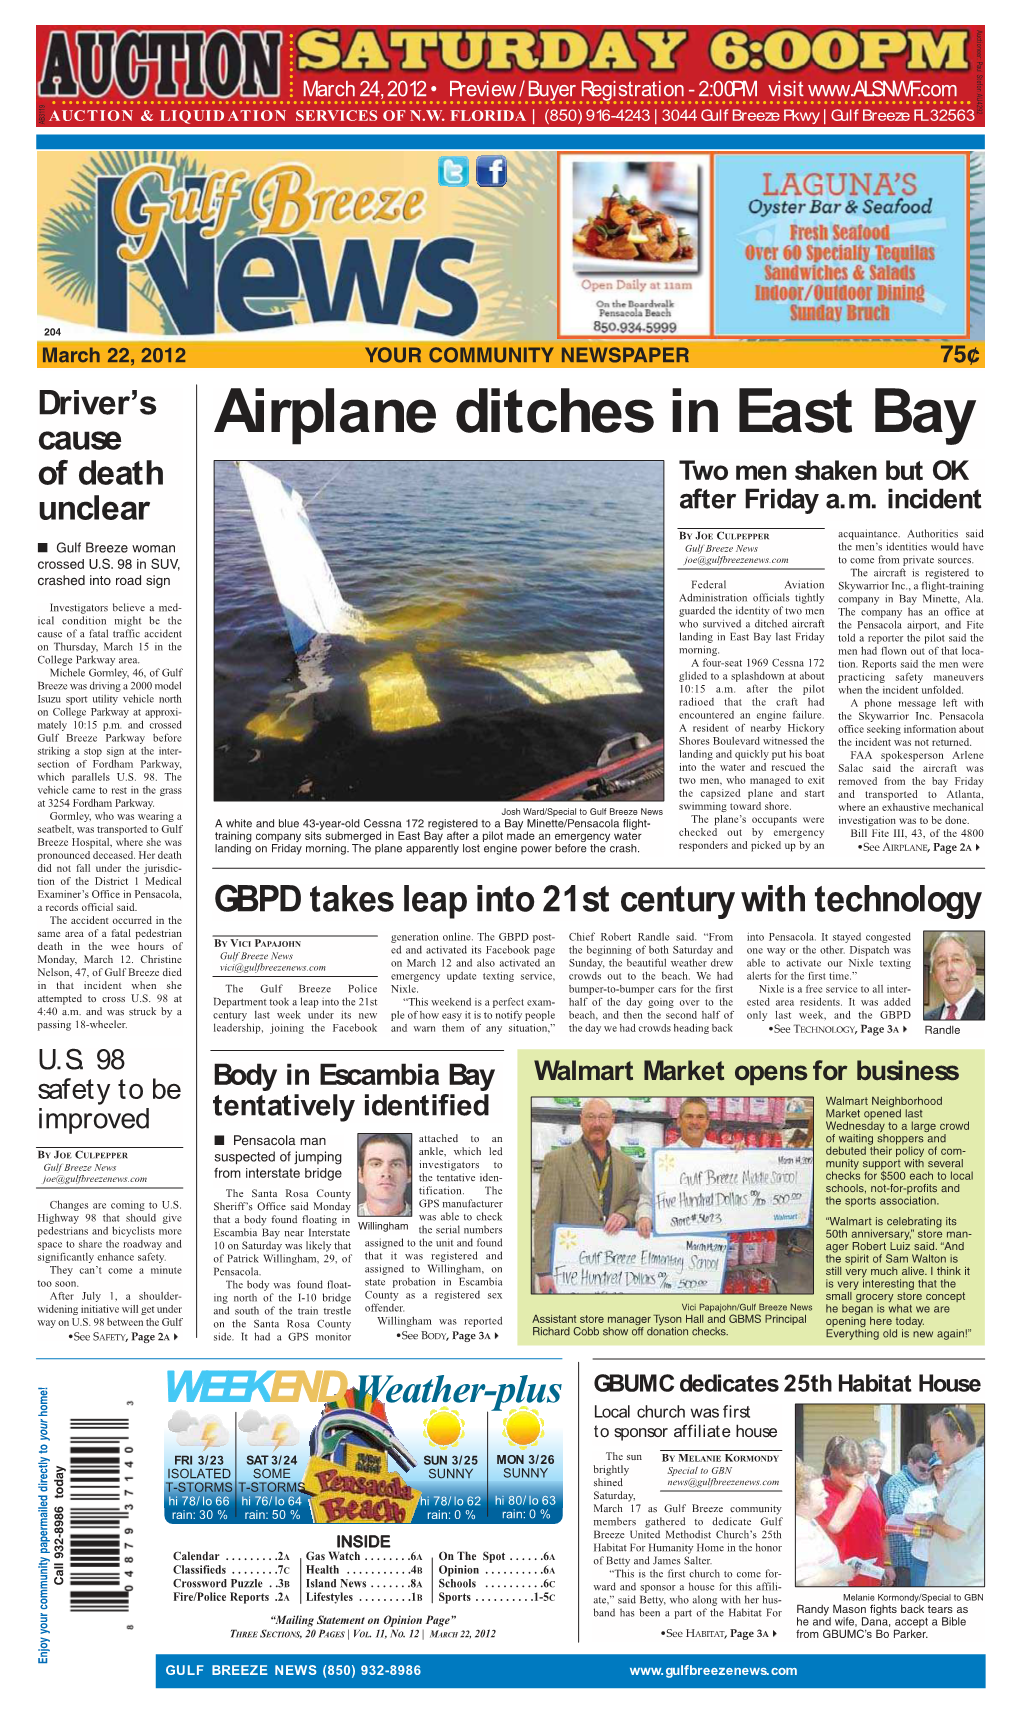 Airplane Ditches in East Bay of Death Two Men Shaken but OK Unclear After Friday A.M